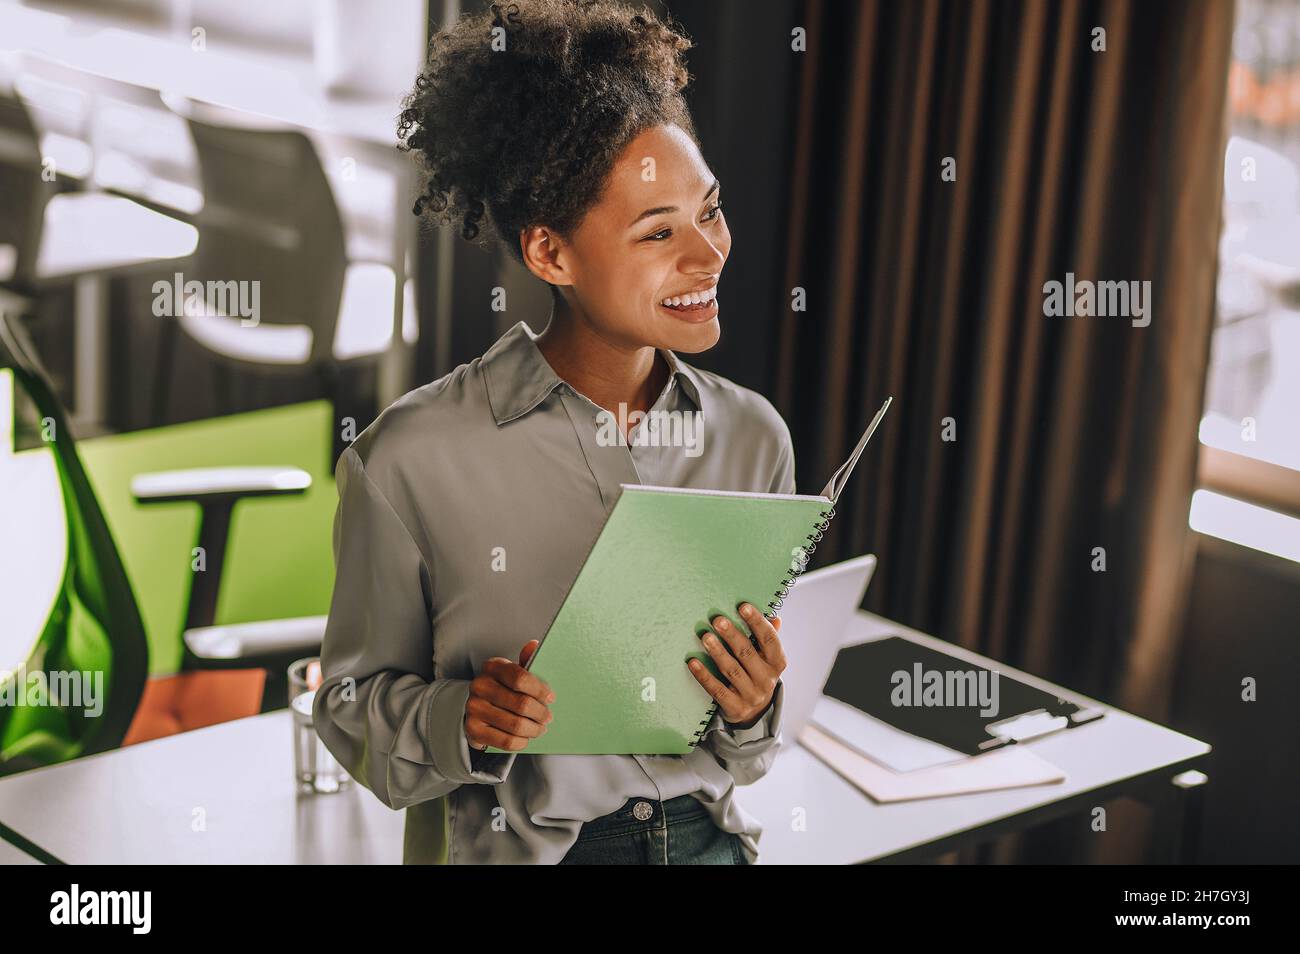 Young curly-haired woman scrutinizing the project papers Stock Photo